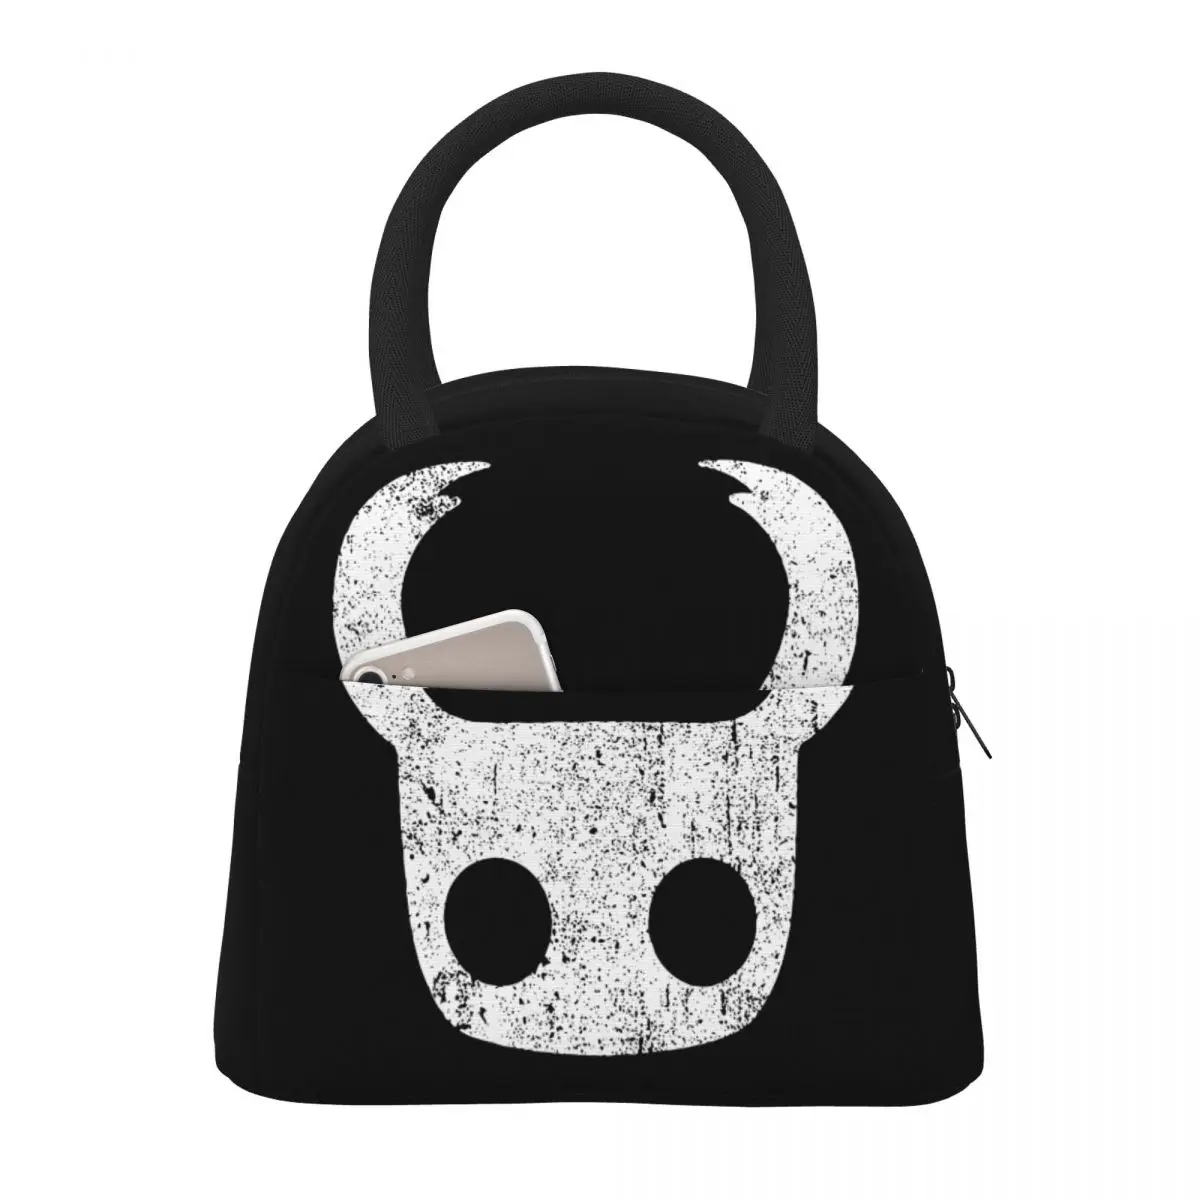 Lunch Bags for Men Women Hollow Knight Insulated Cooler Portable Picnic Work Game Canvas Tote Bento Pouch